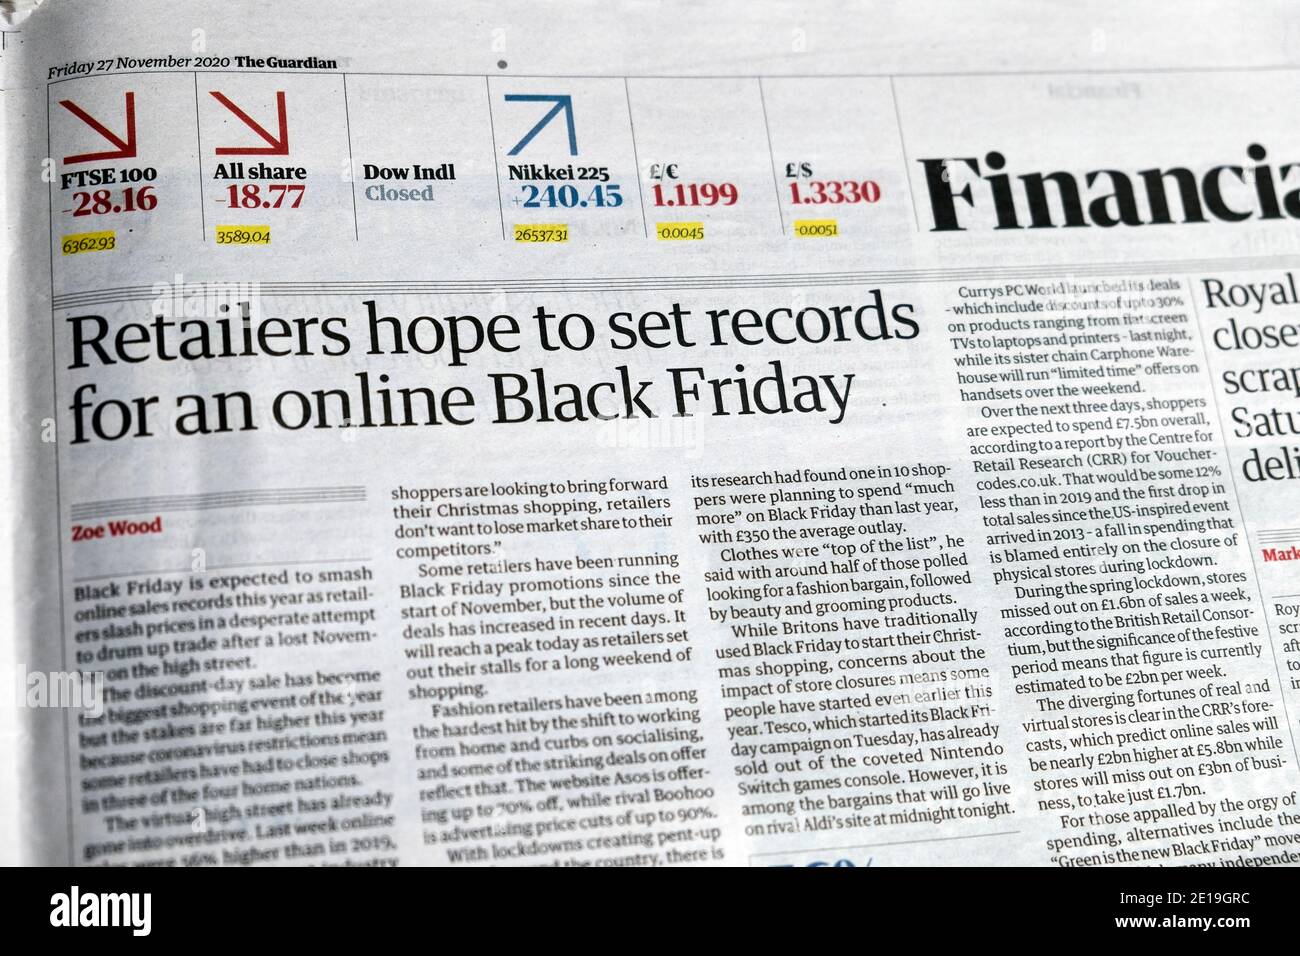 'Retailers hope to set records for an online Black Friday' Financial page in Guardian newspaper headline 27 November 2020 Stock Photo